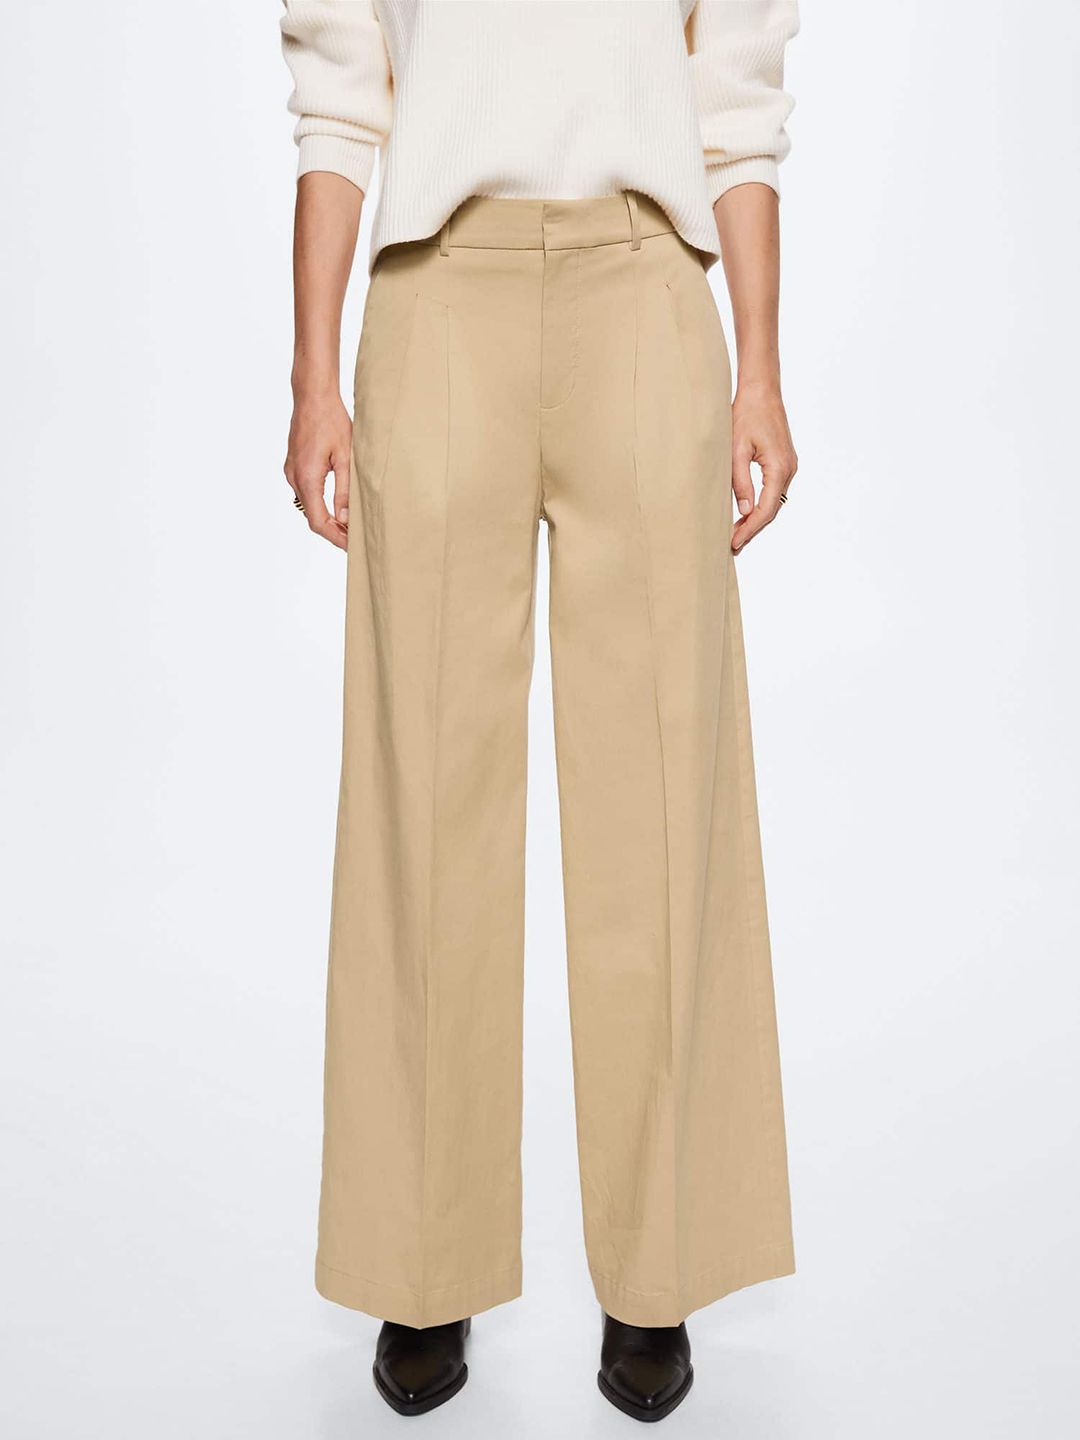 MANGO Women Beige Pleated Sustainable Trousers Price in India